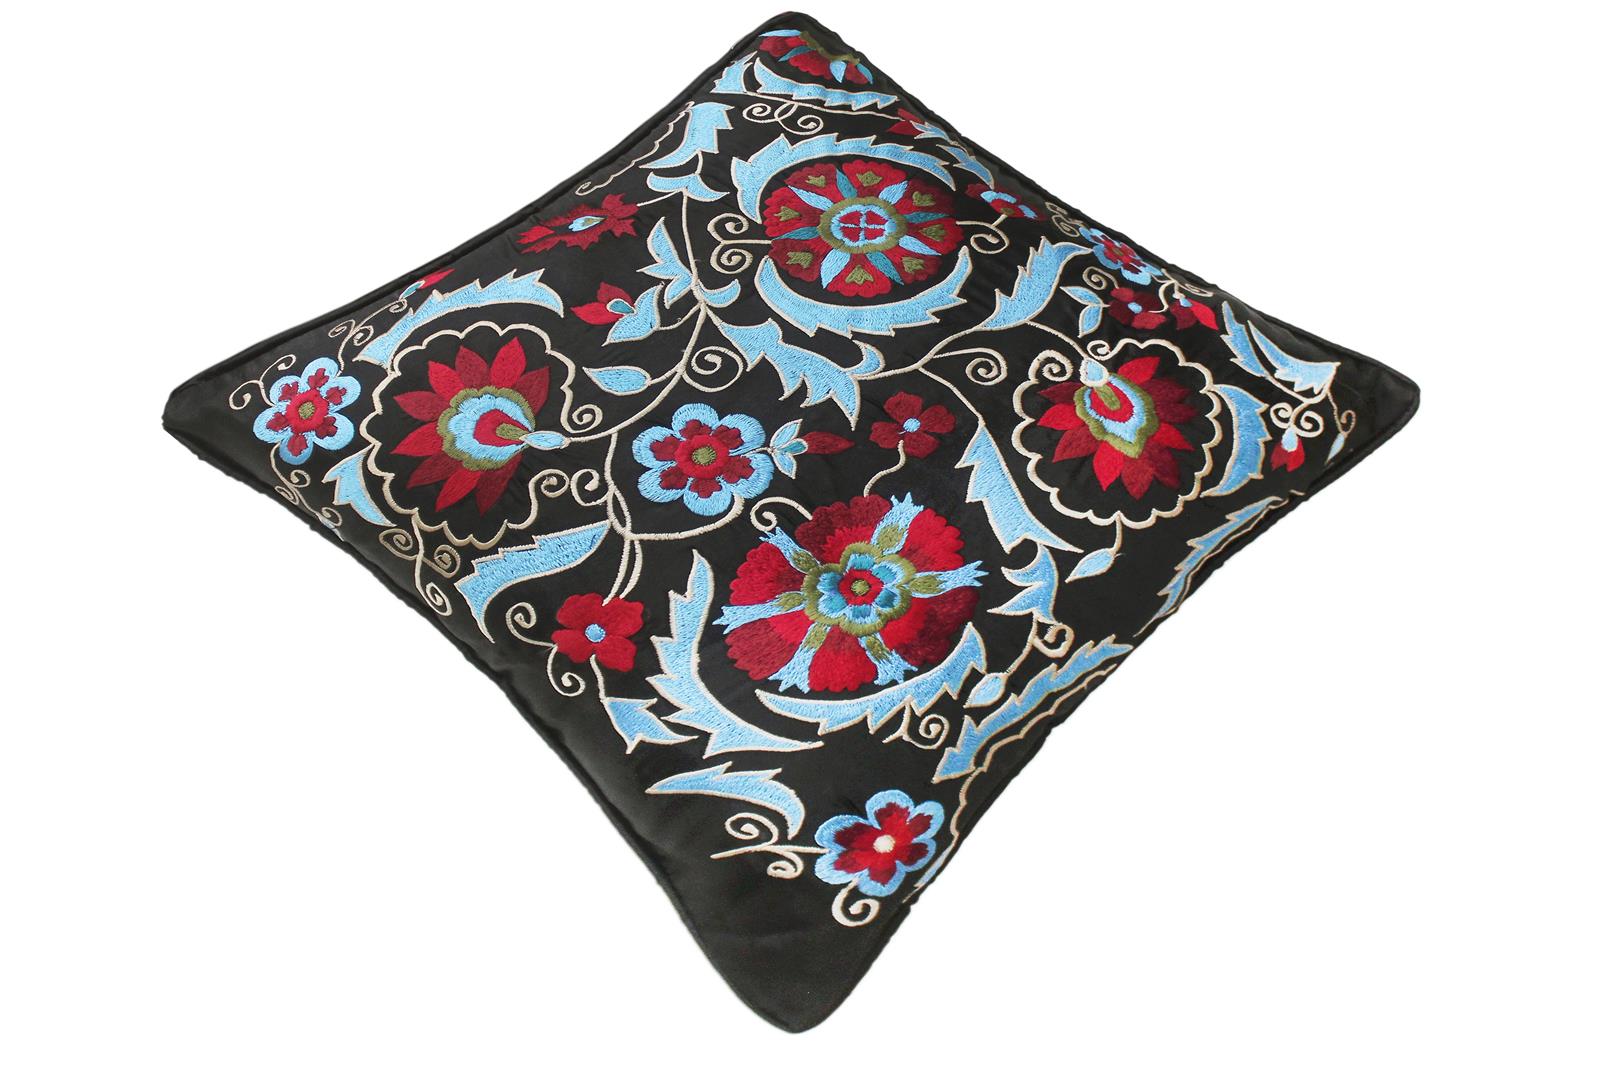 handmade Transitional Pillow Black Red Hand-Woven SQUARE SILK EMBROI pillow